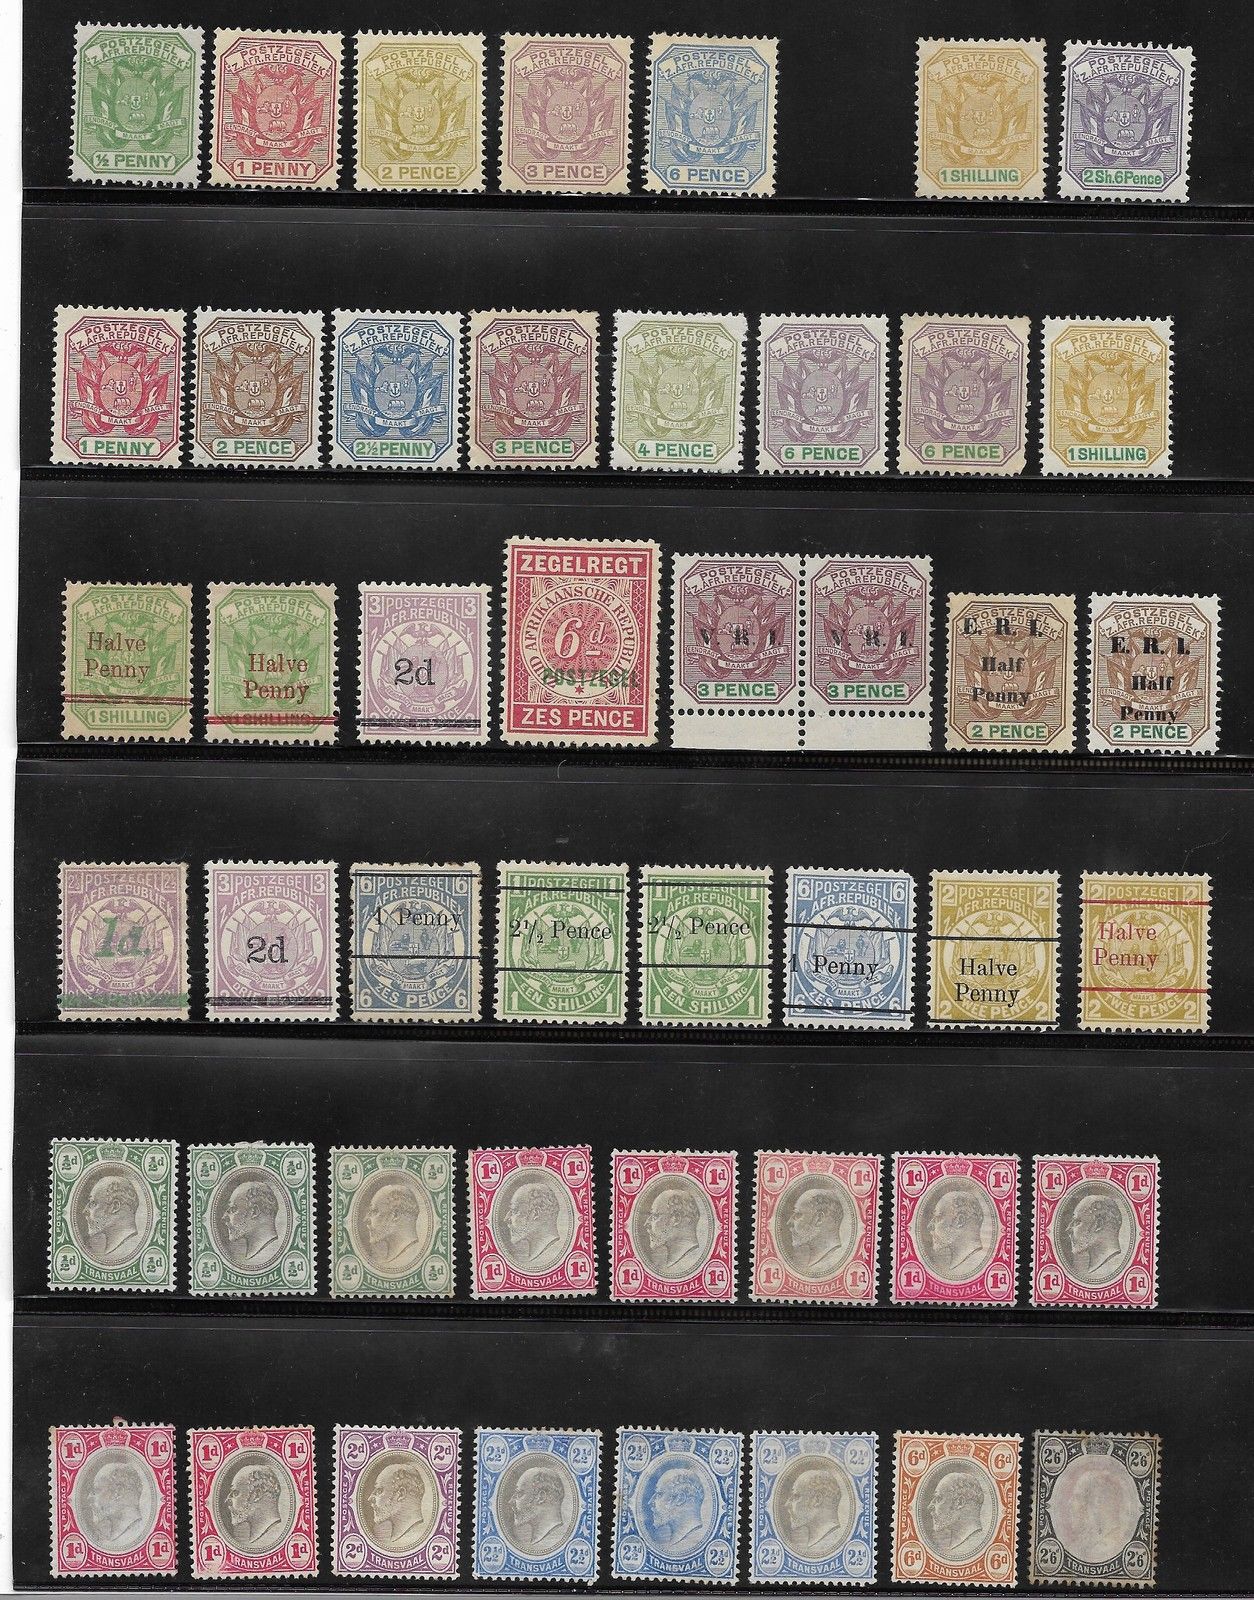 SOUTH AFRICA STAMP TRANSVAAL - COLLECTION OF UNUSED STAMPS